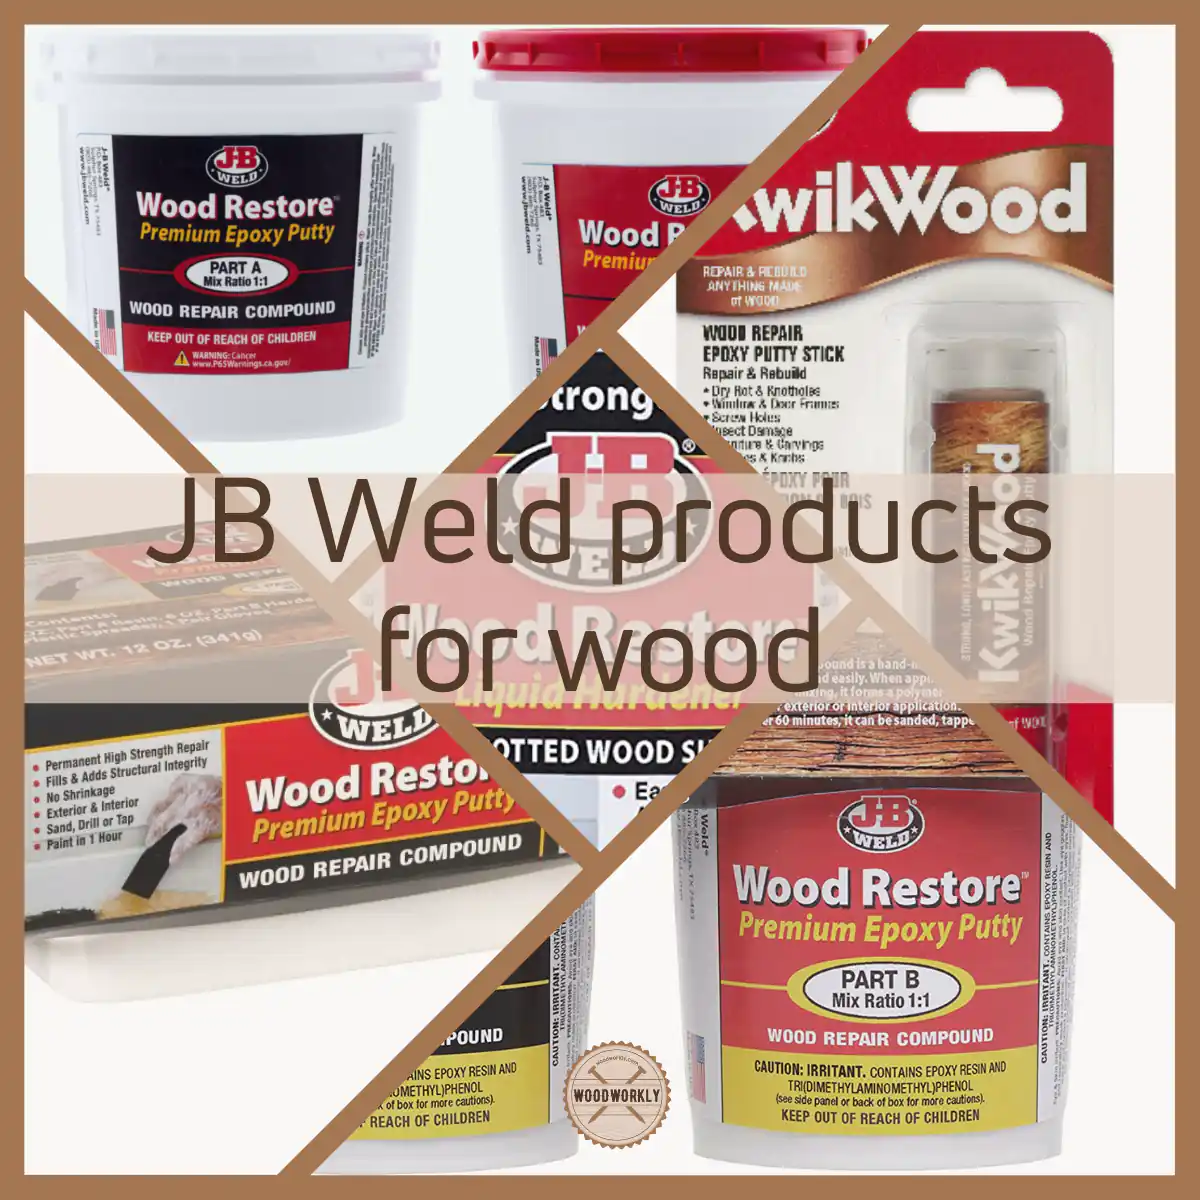 JB Weld Products for wood